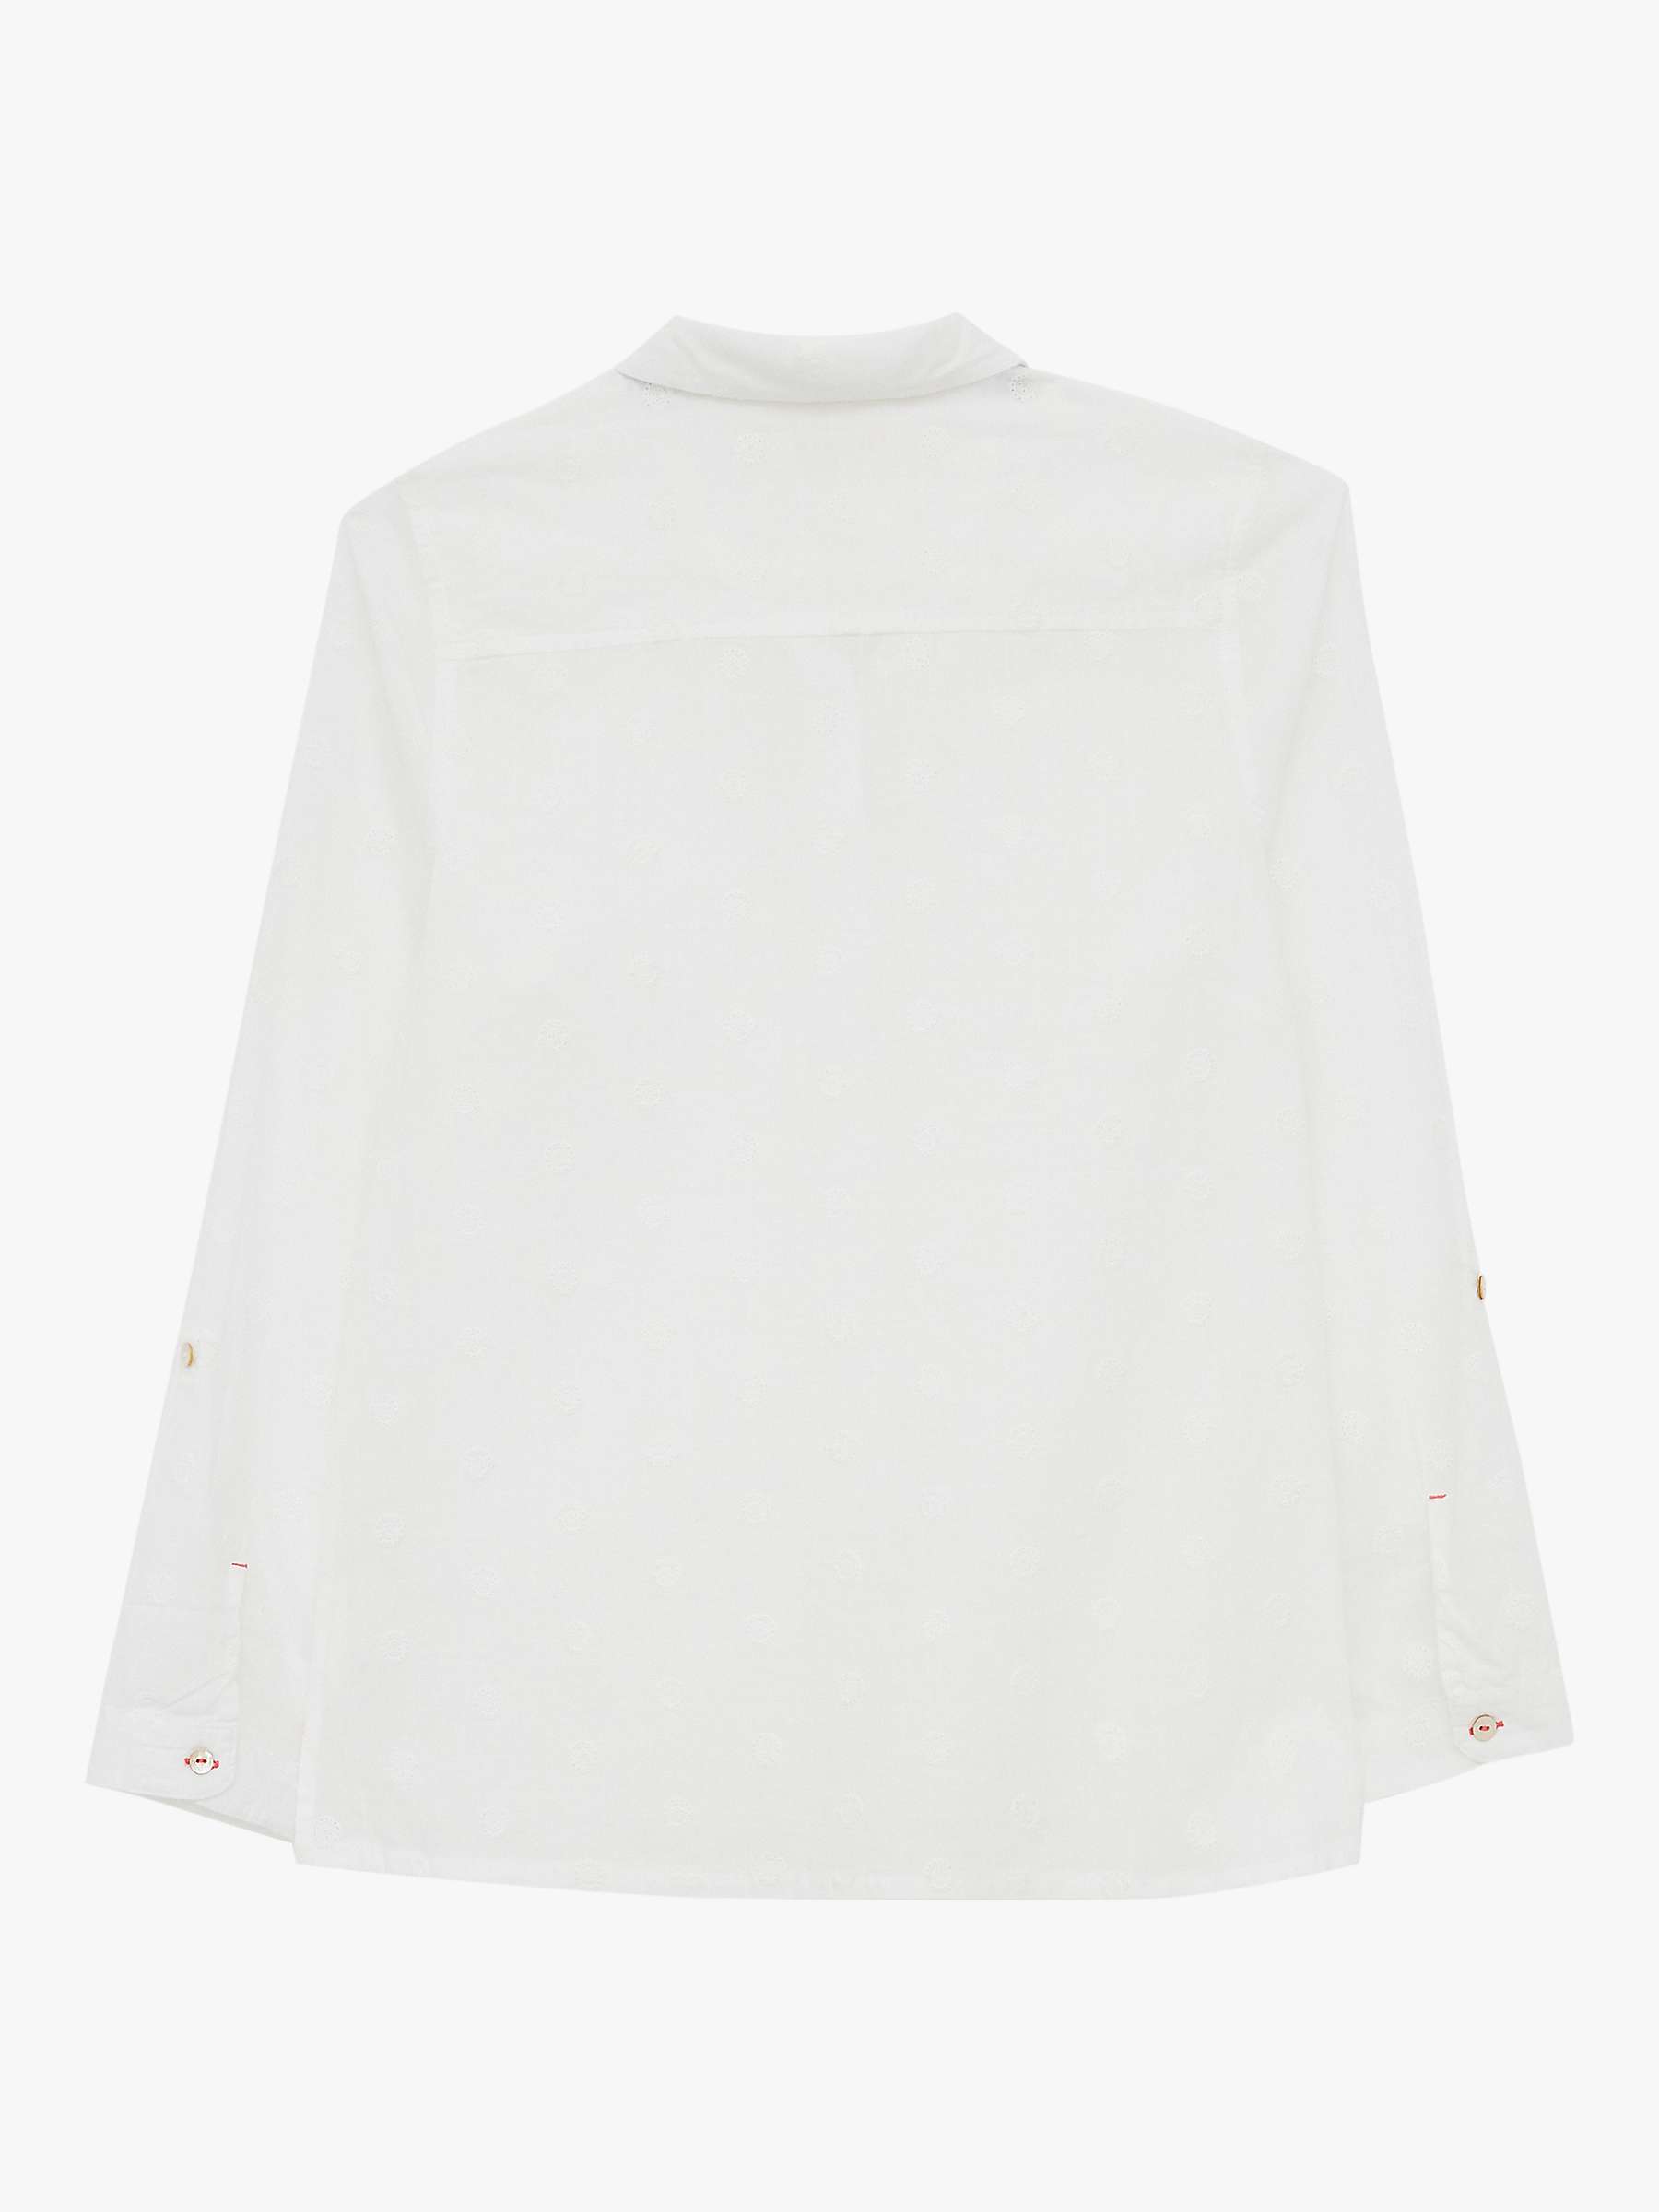 White Stuff Emily Embroidered Shirt, Pale Ivory at John Lewis & Partners